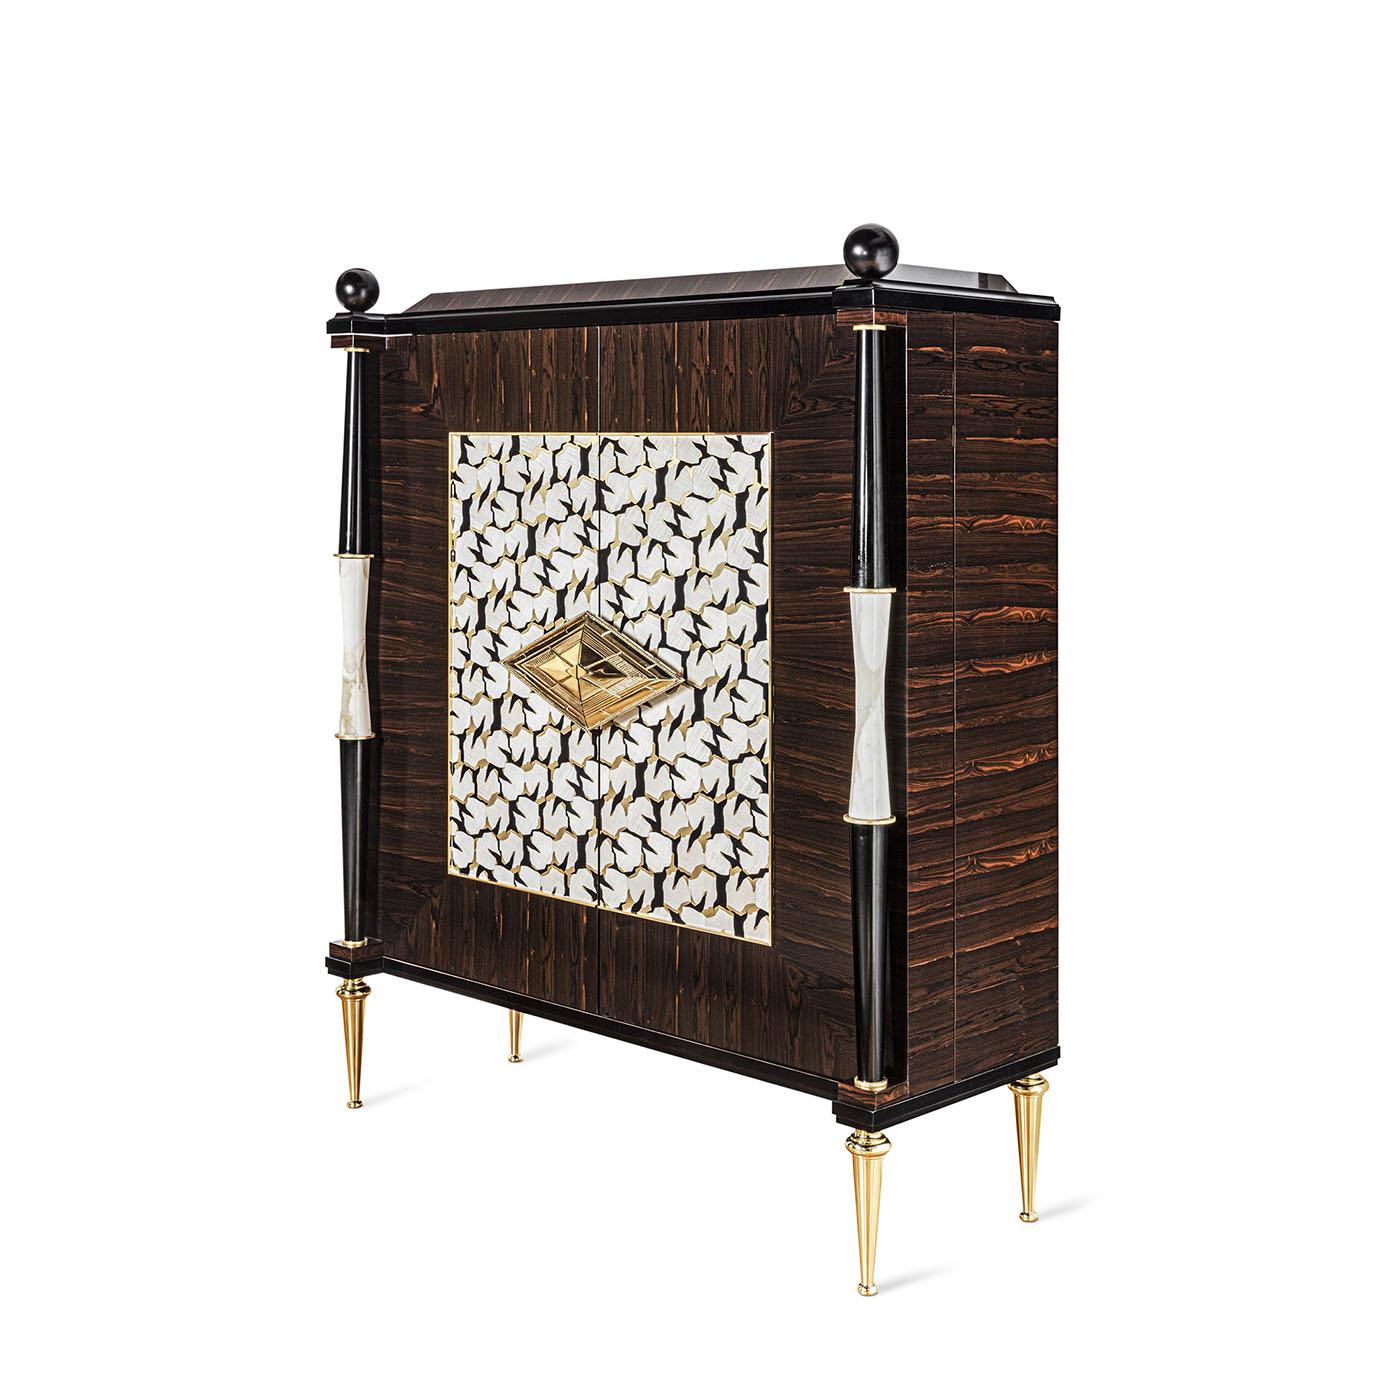 Ziricote wood bar cabinet with blanched maple and brass inlays. Marble columns support the sturdy construction, which is enhanced with brass ornaments.